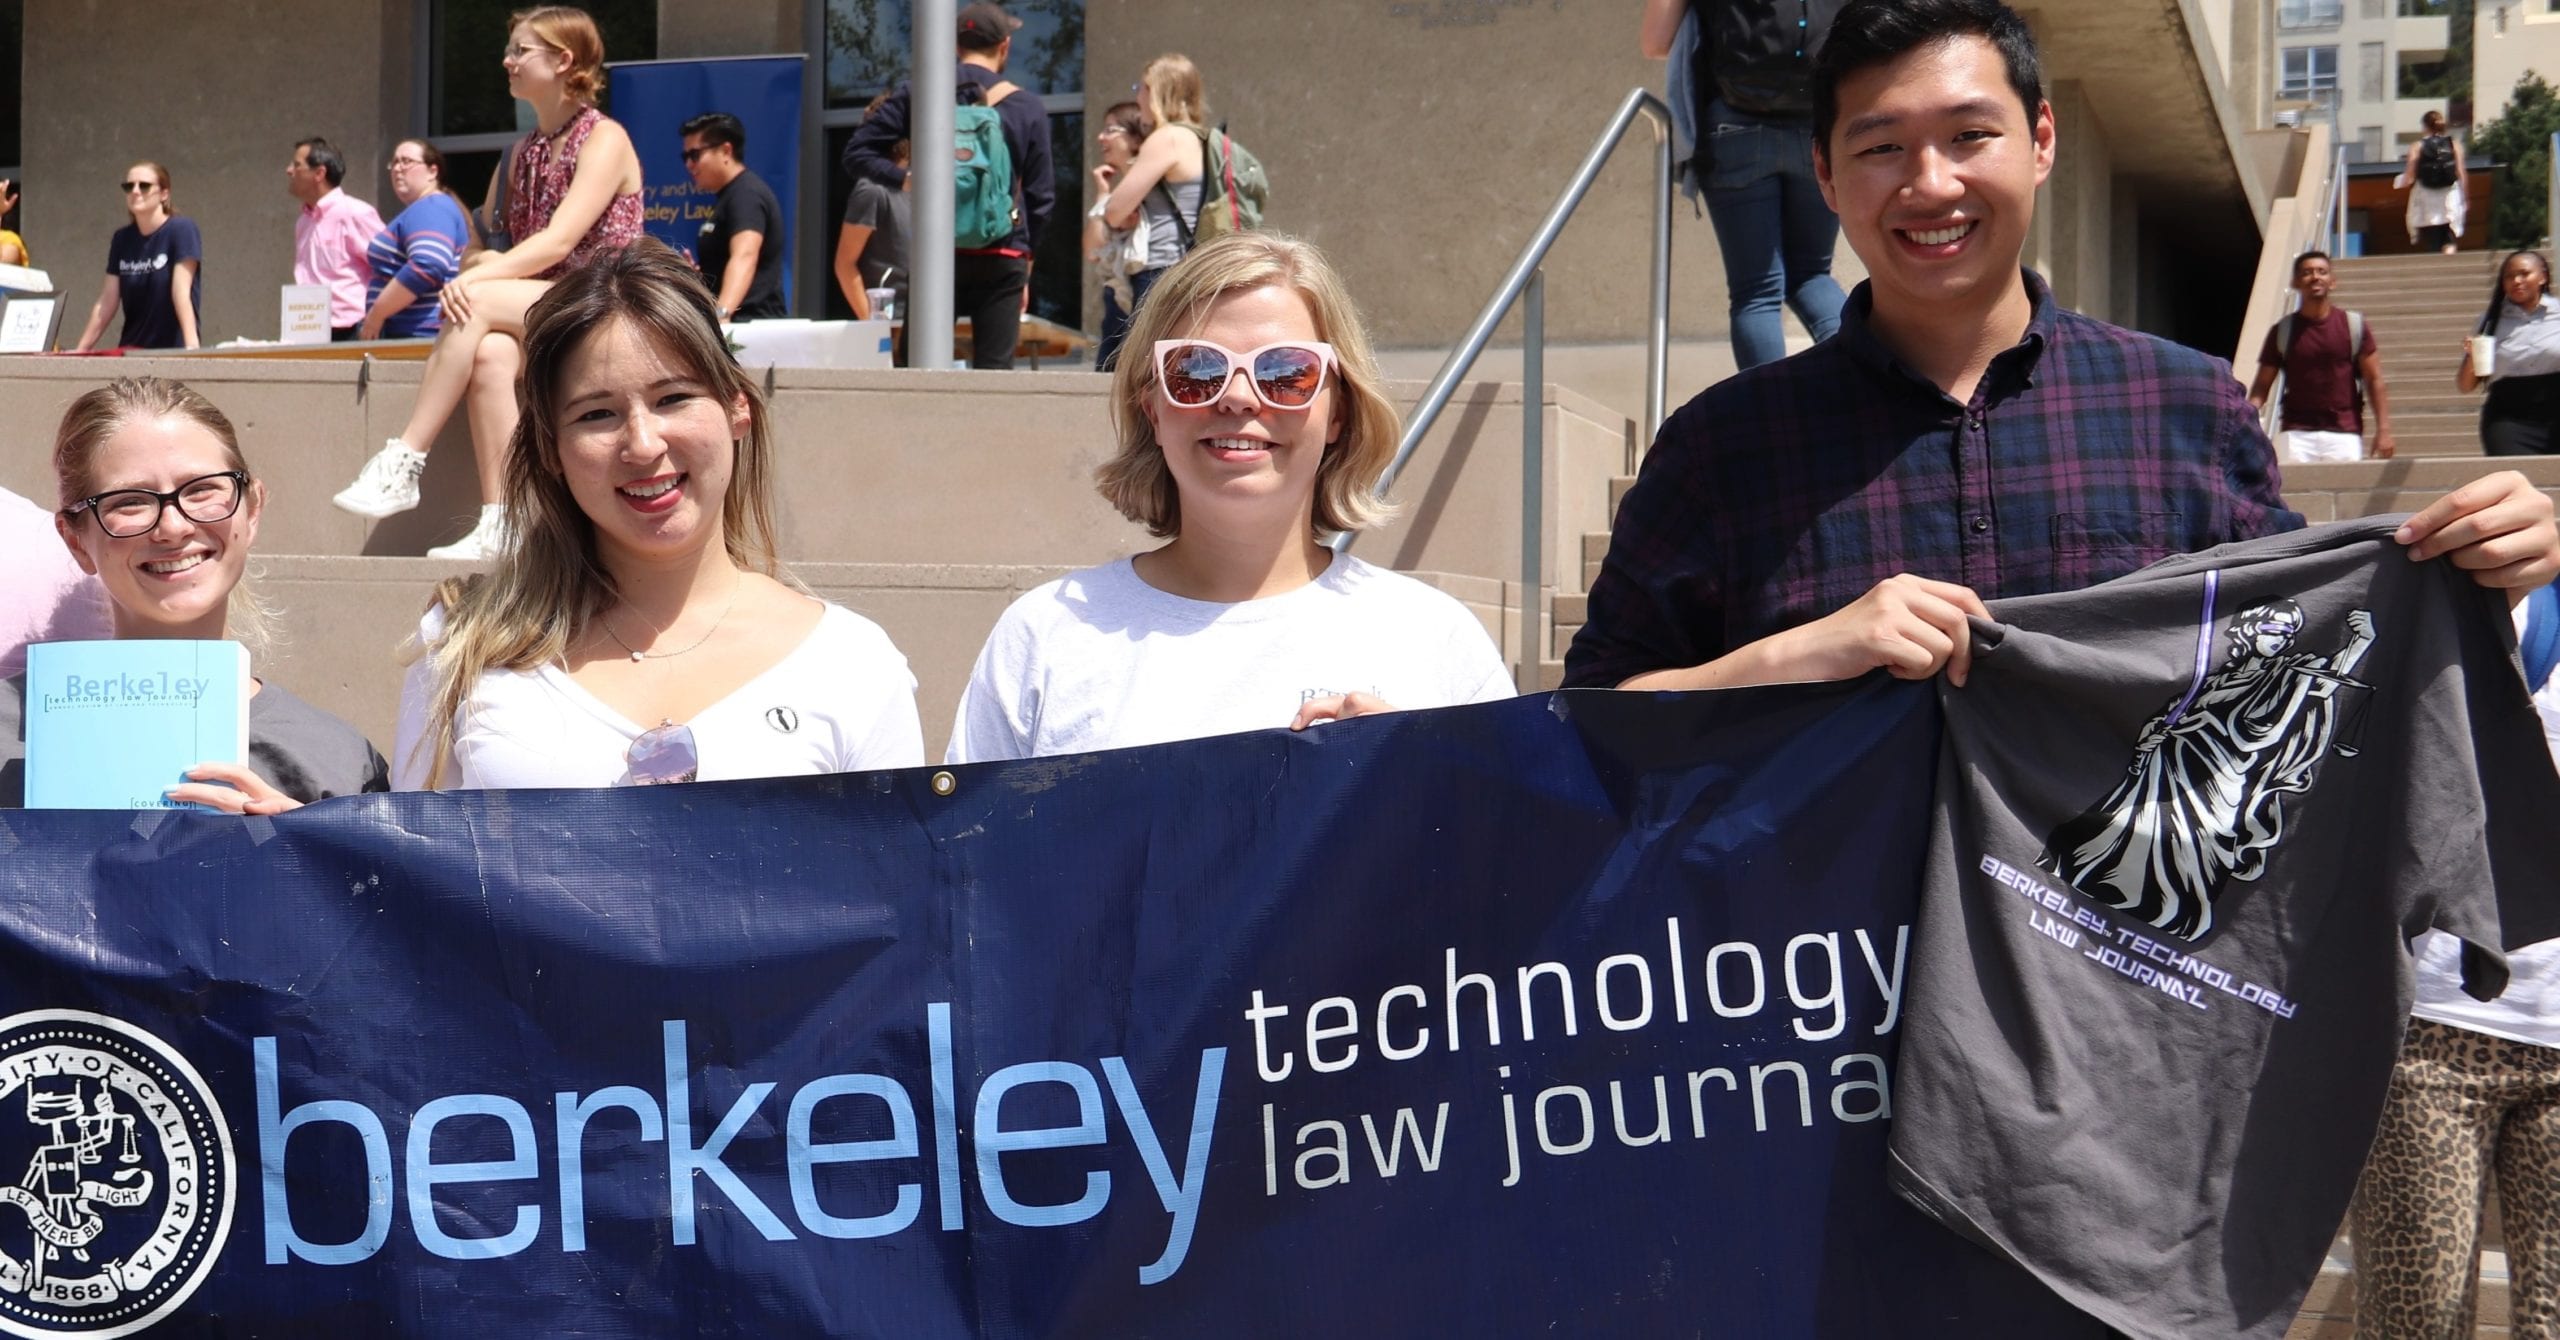 A group of students hold a Berkeley Center For Law & Technology banner at an outdoor event